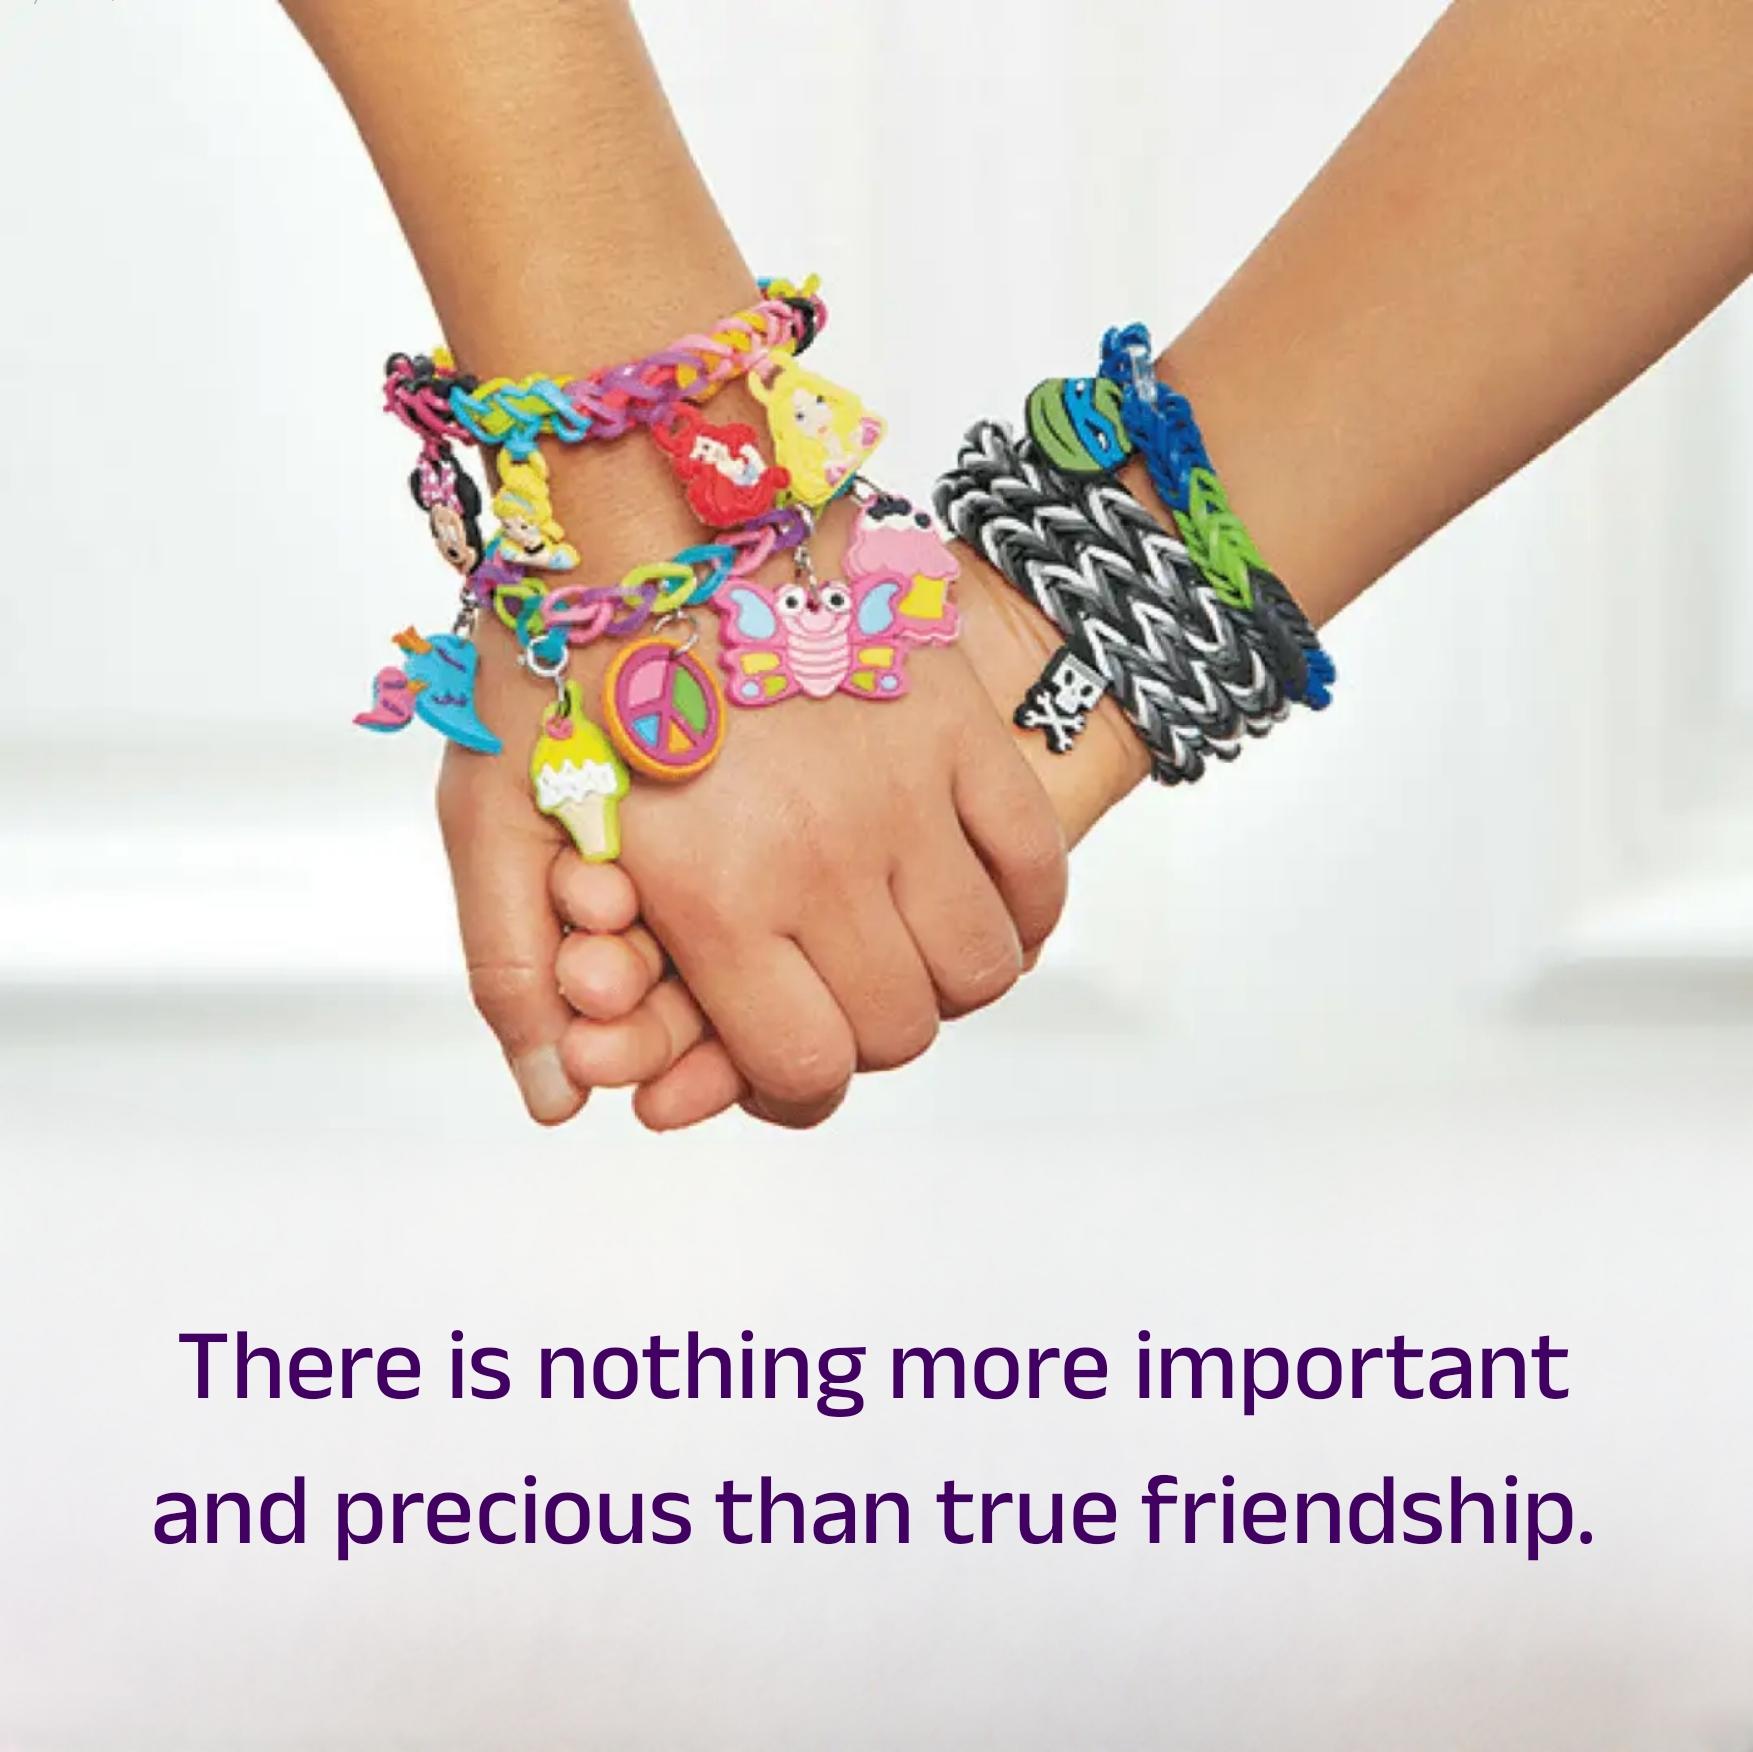 There is nothing more important and precious than true friendship